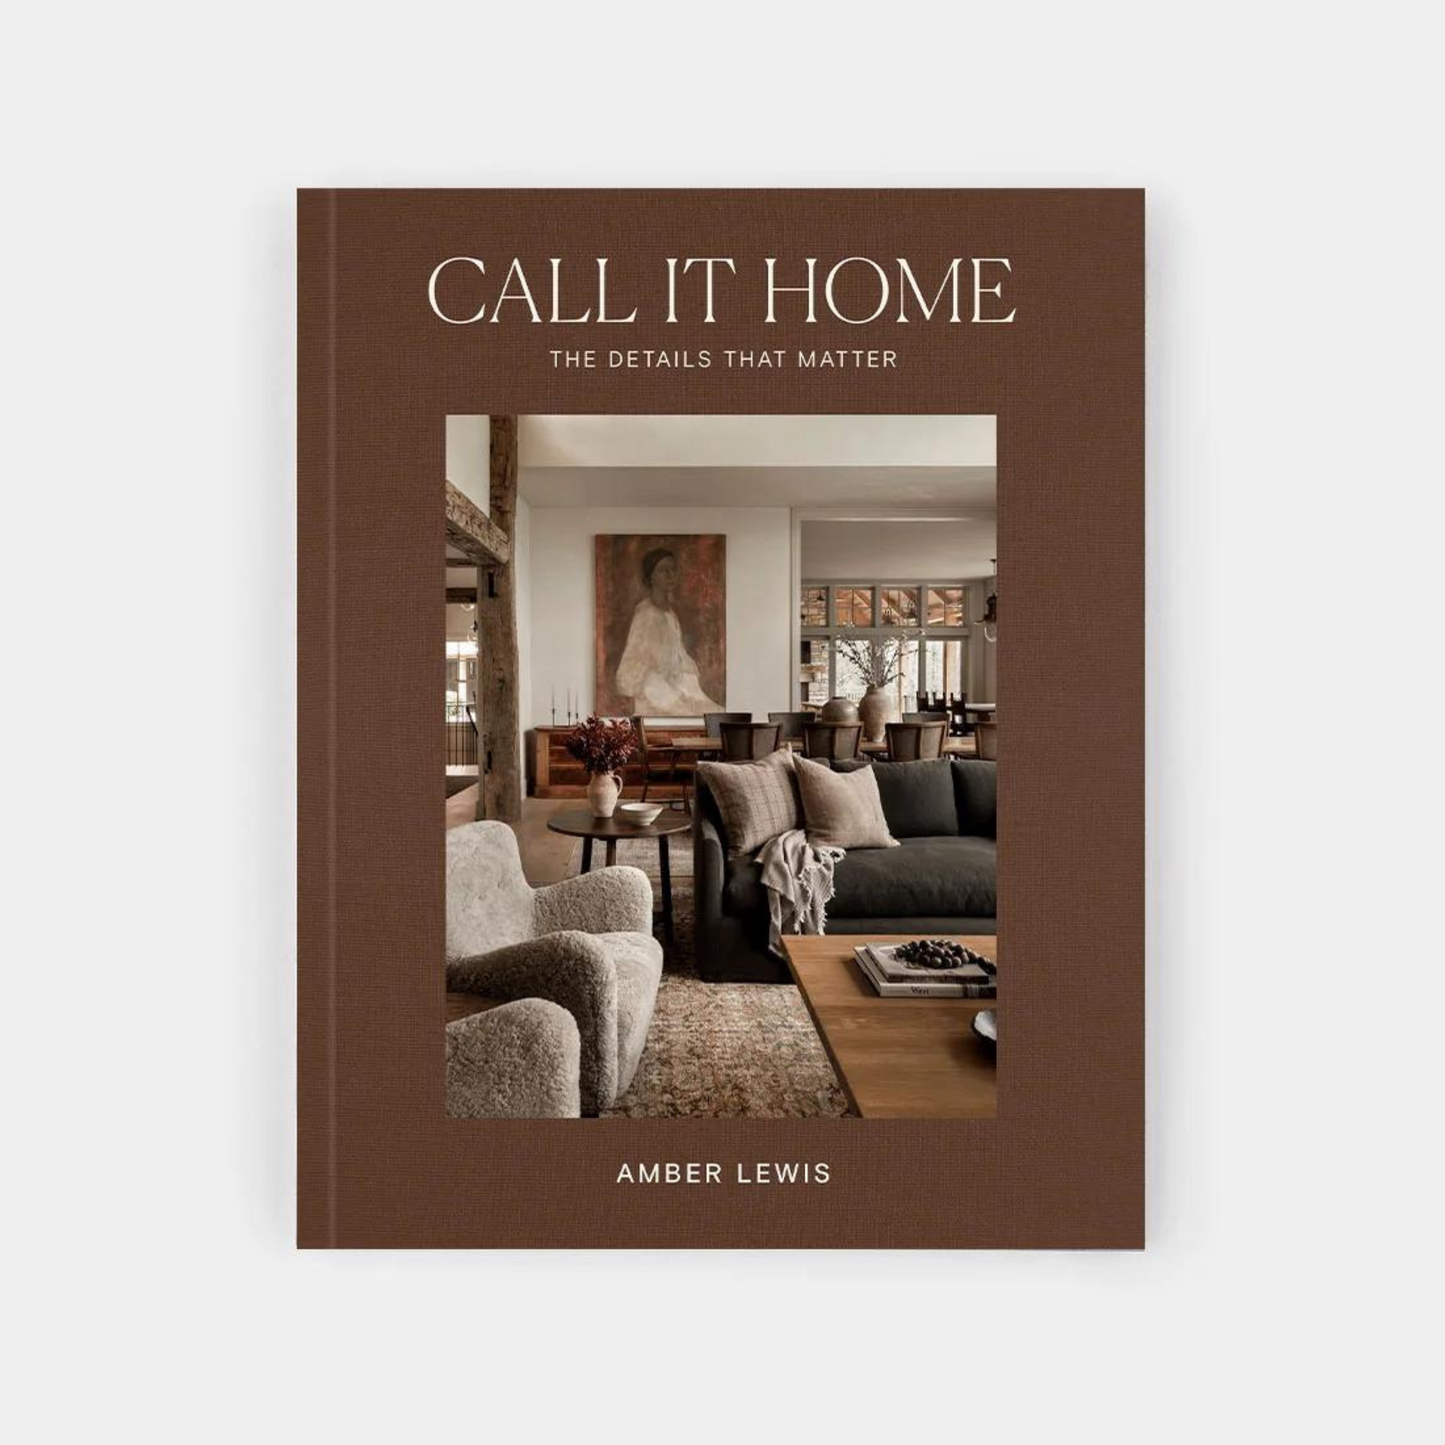 Call it Home by Amber Lewis